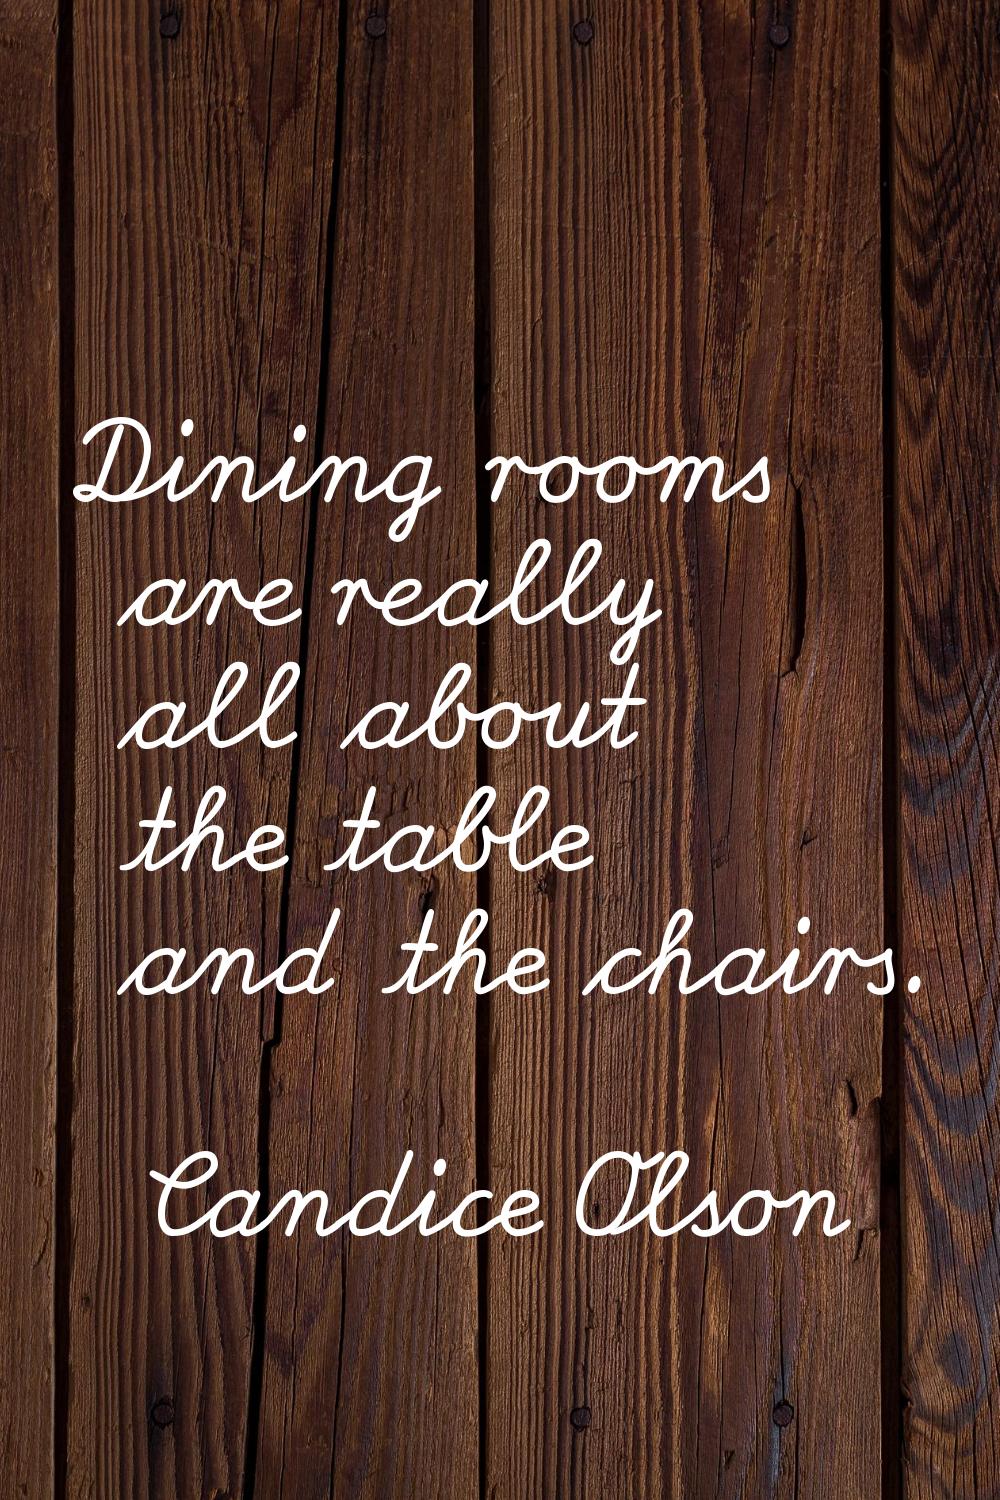 Dining rooms are really all about the table and the chairs.